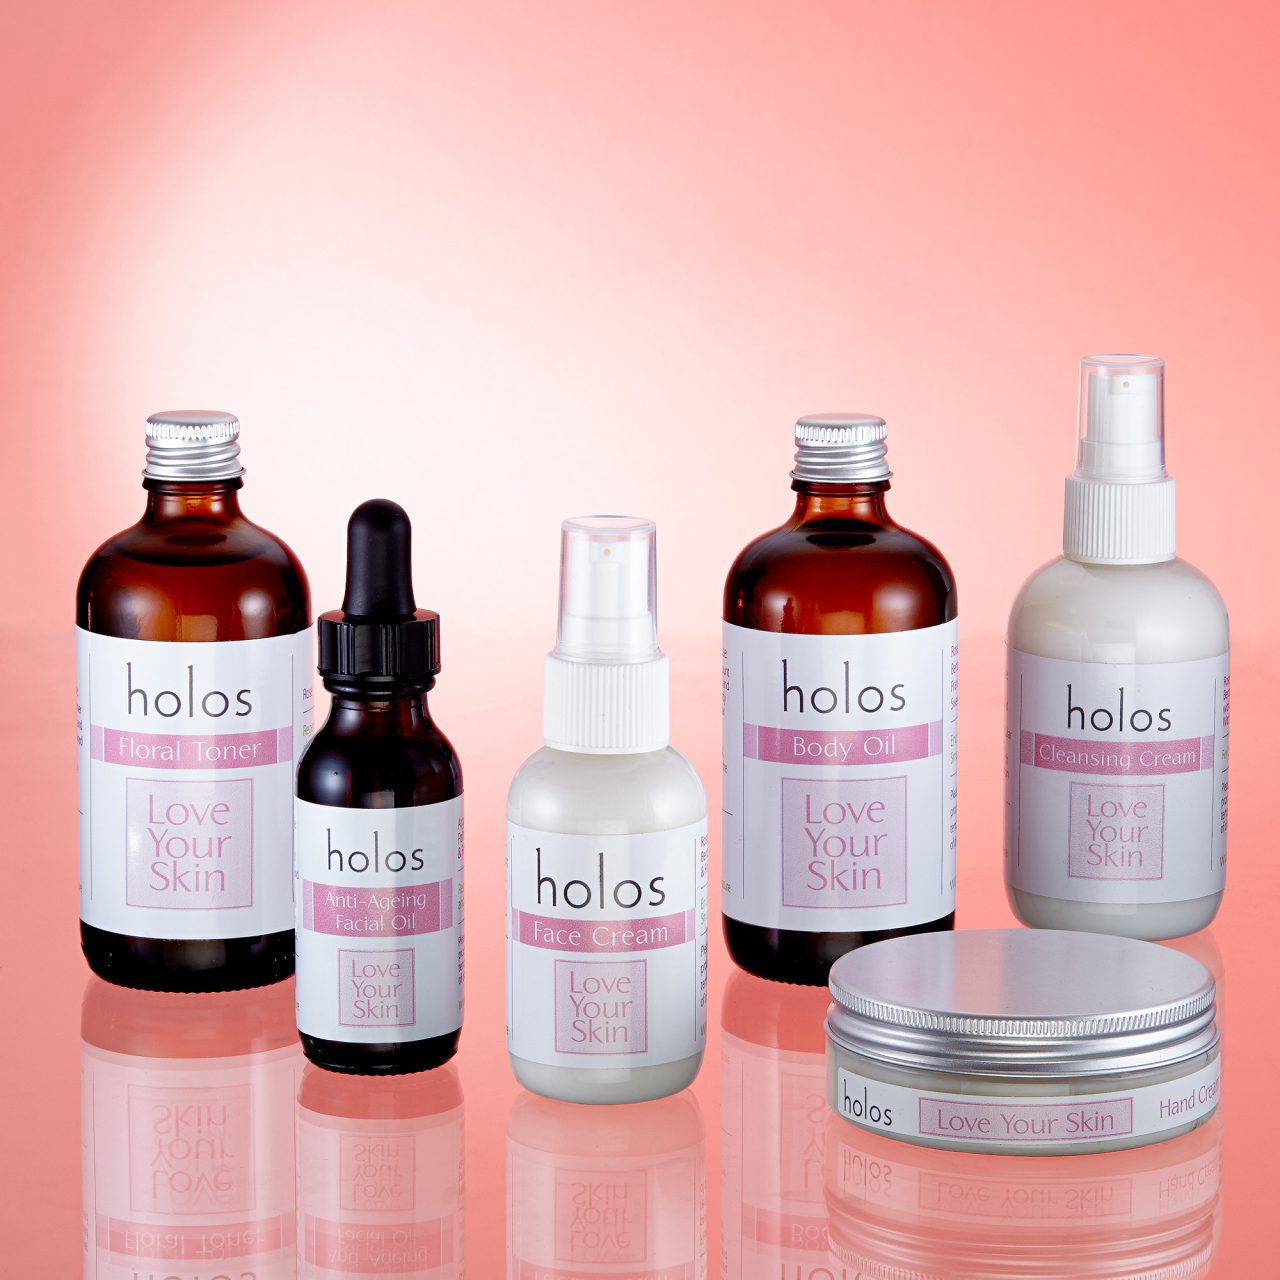 skincare products on a clean pink background